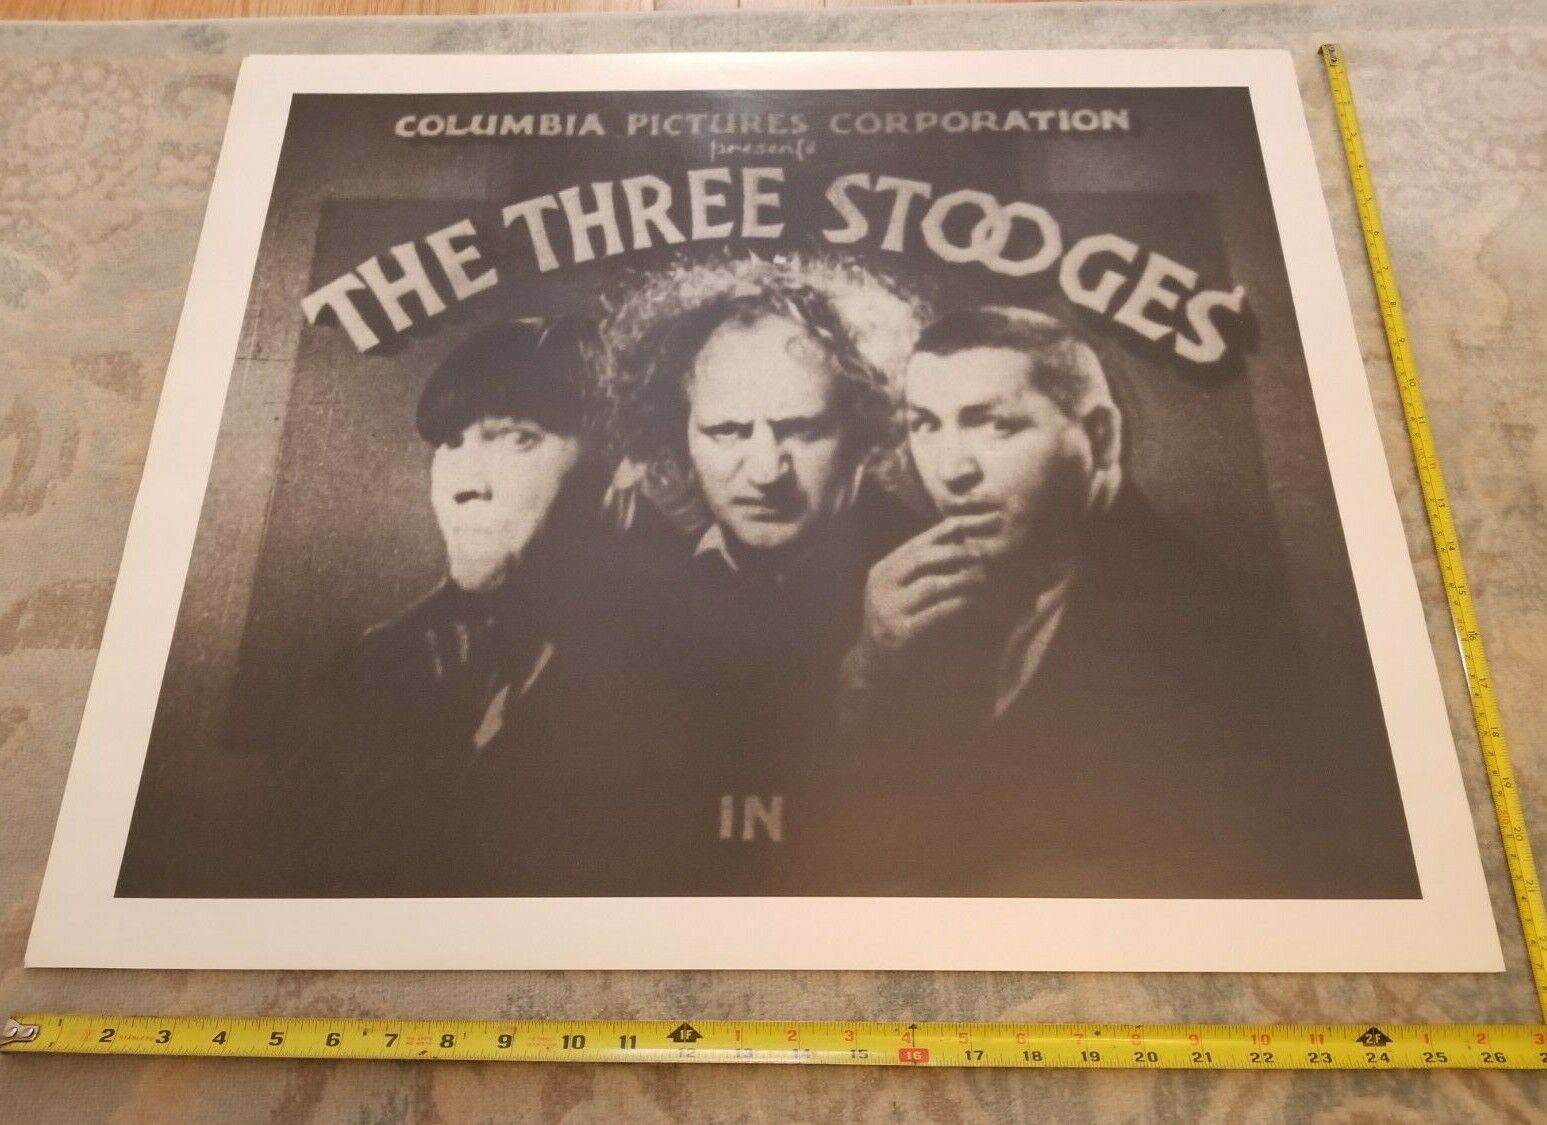 Three Stooges poster (Pack of 3) Columbia Pictures opening shot (Mark's comics) Без бренда - фотография #2